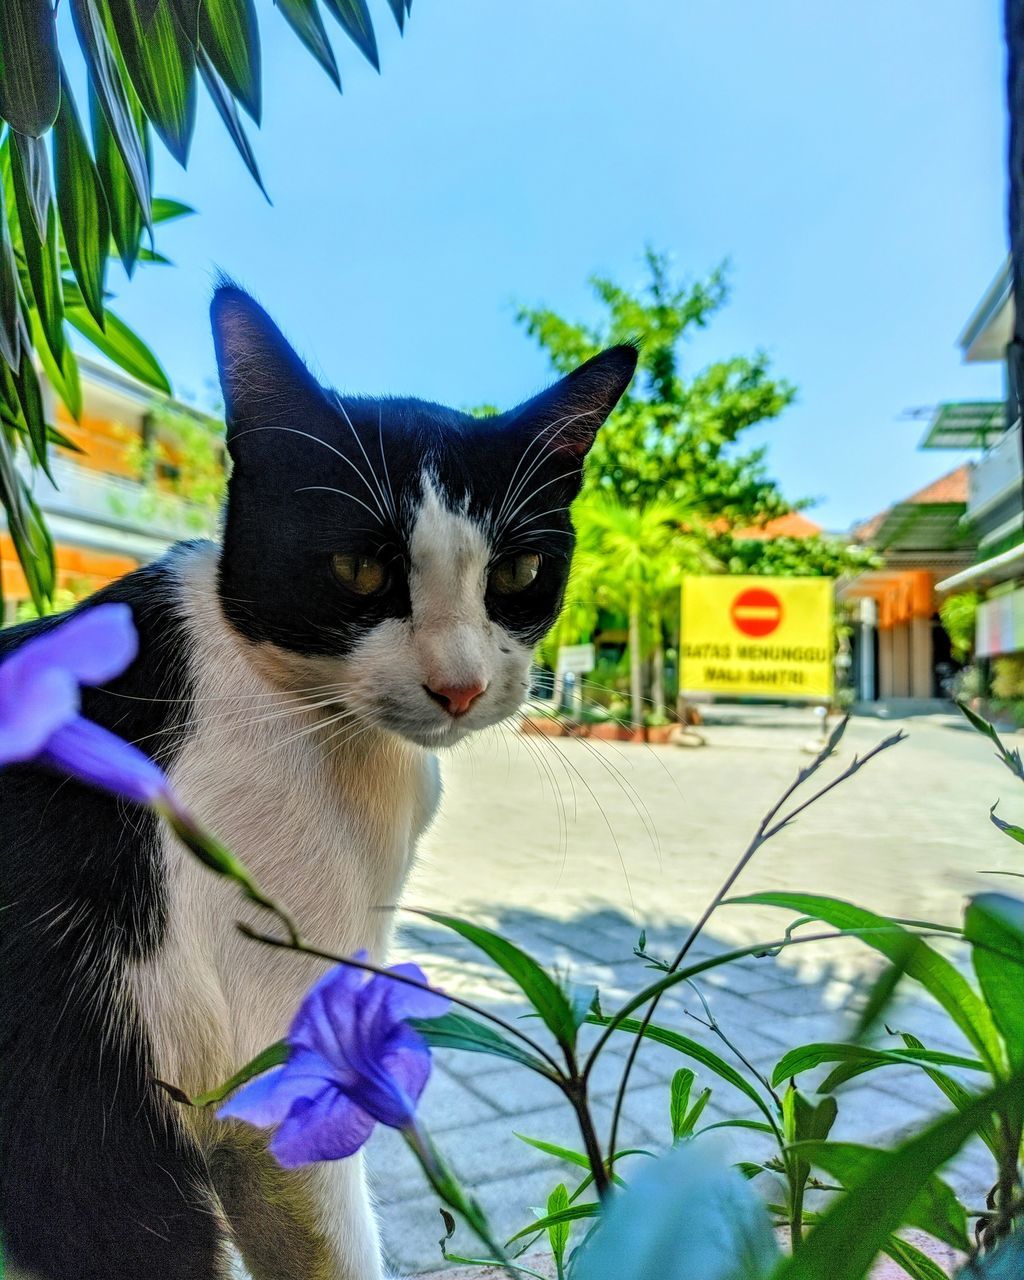 cat, pet, animal, animal themes, domestic animals, mammal, one animal, domestic cat, feline, plant, flower, nature, no people, whiskers, felidae, day, small to medium-sized cats, blue, tree, portrait, building exterior, outdoors